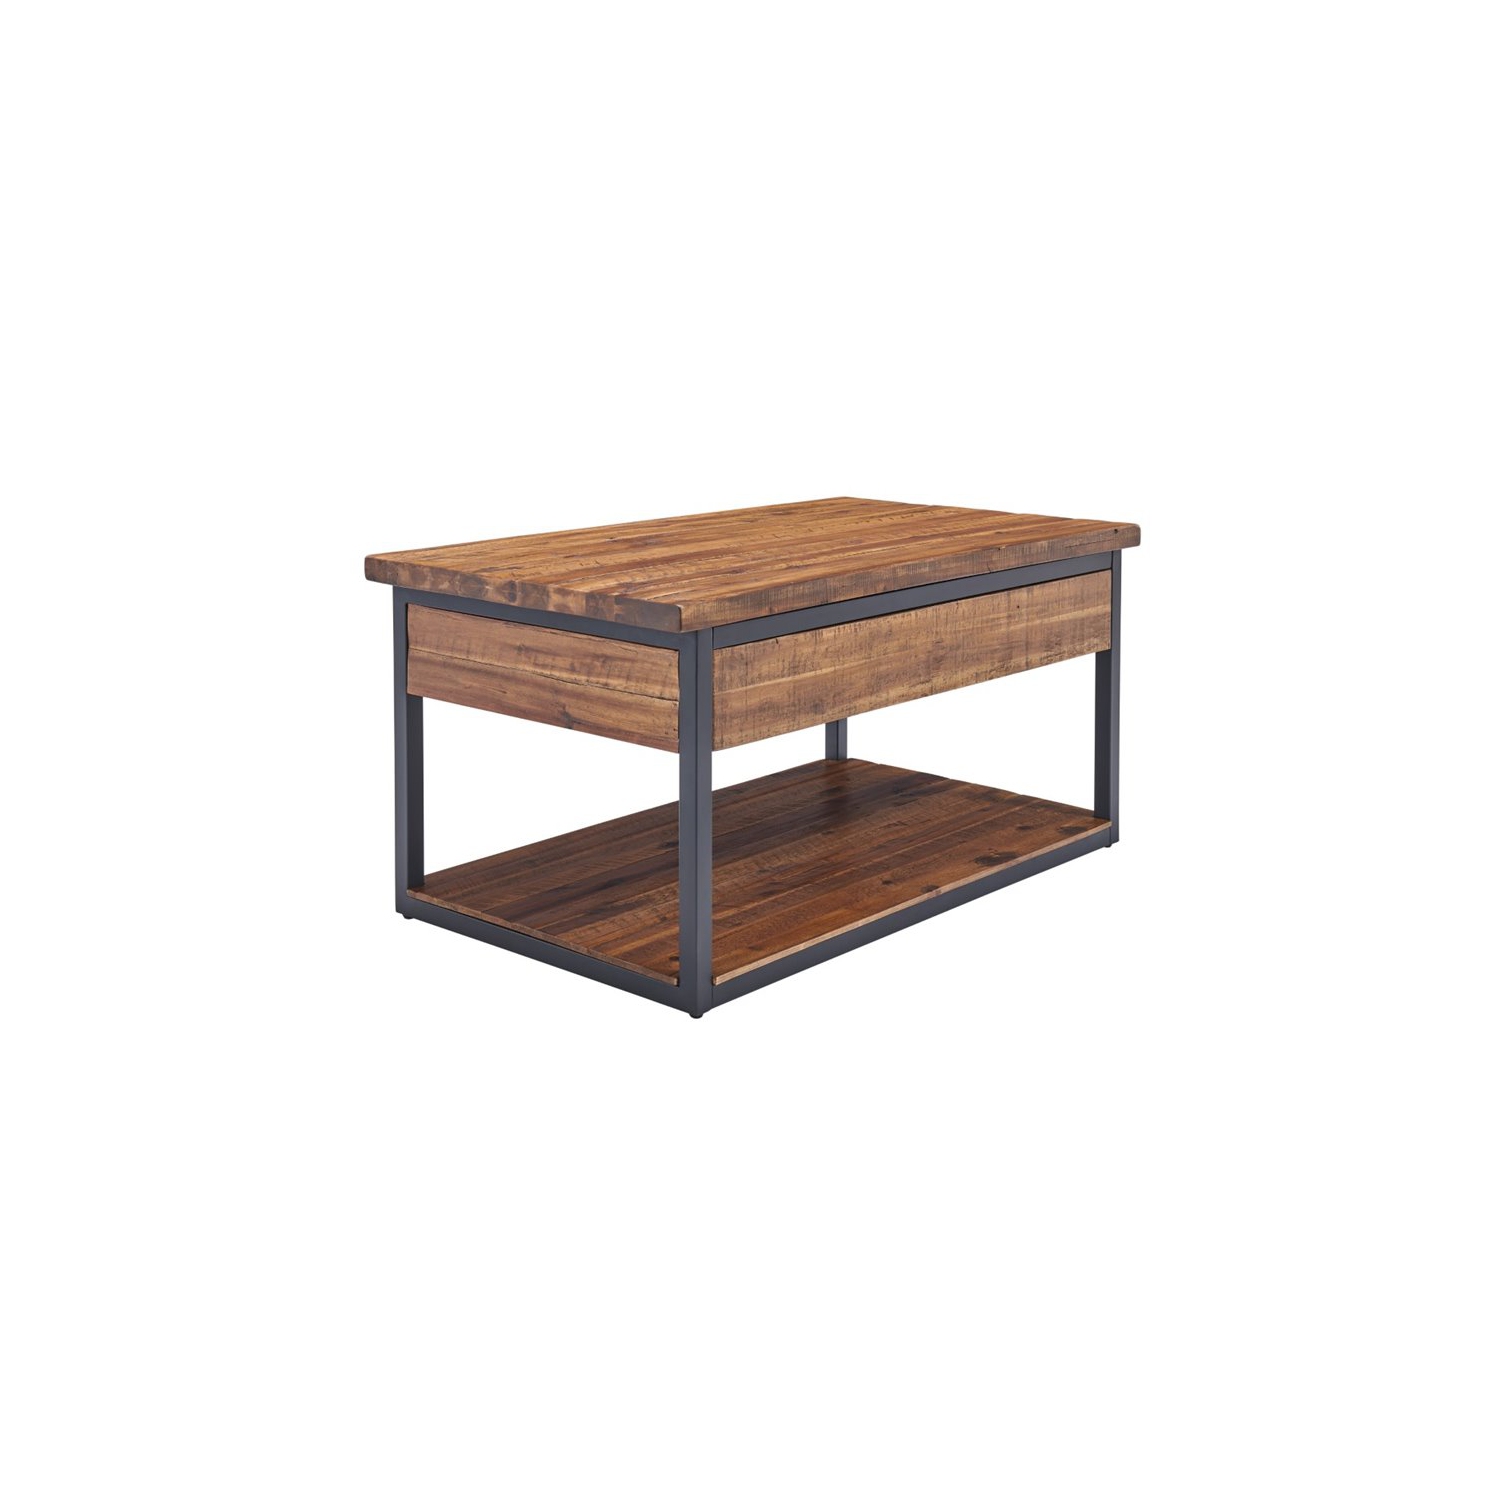 Alaterre Furniture Claremont 42"L Rustic Wood Coffee Table with Low Shelf